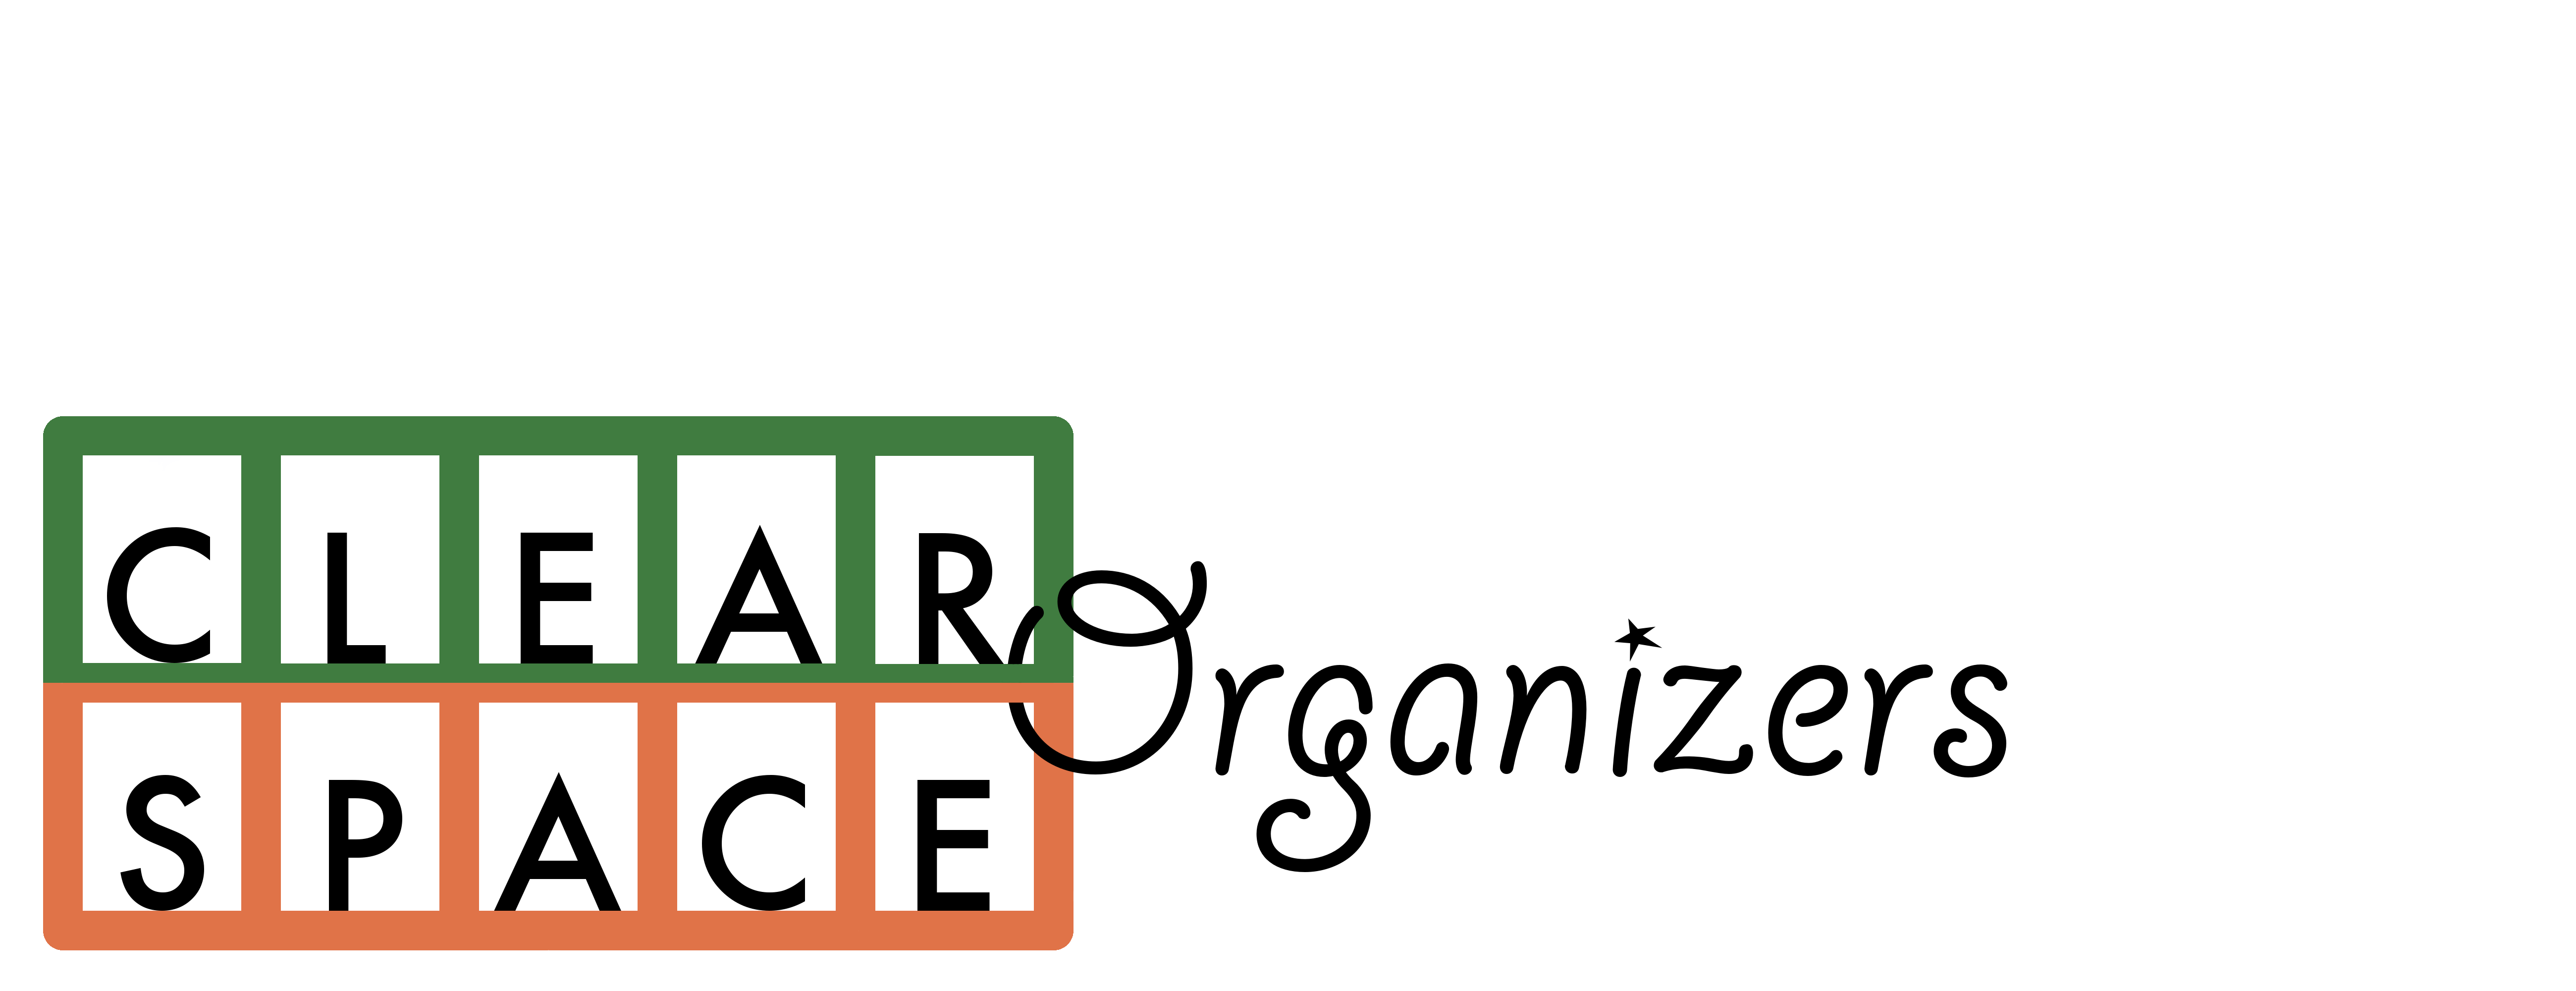 Clear Space Organizers Logo